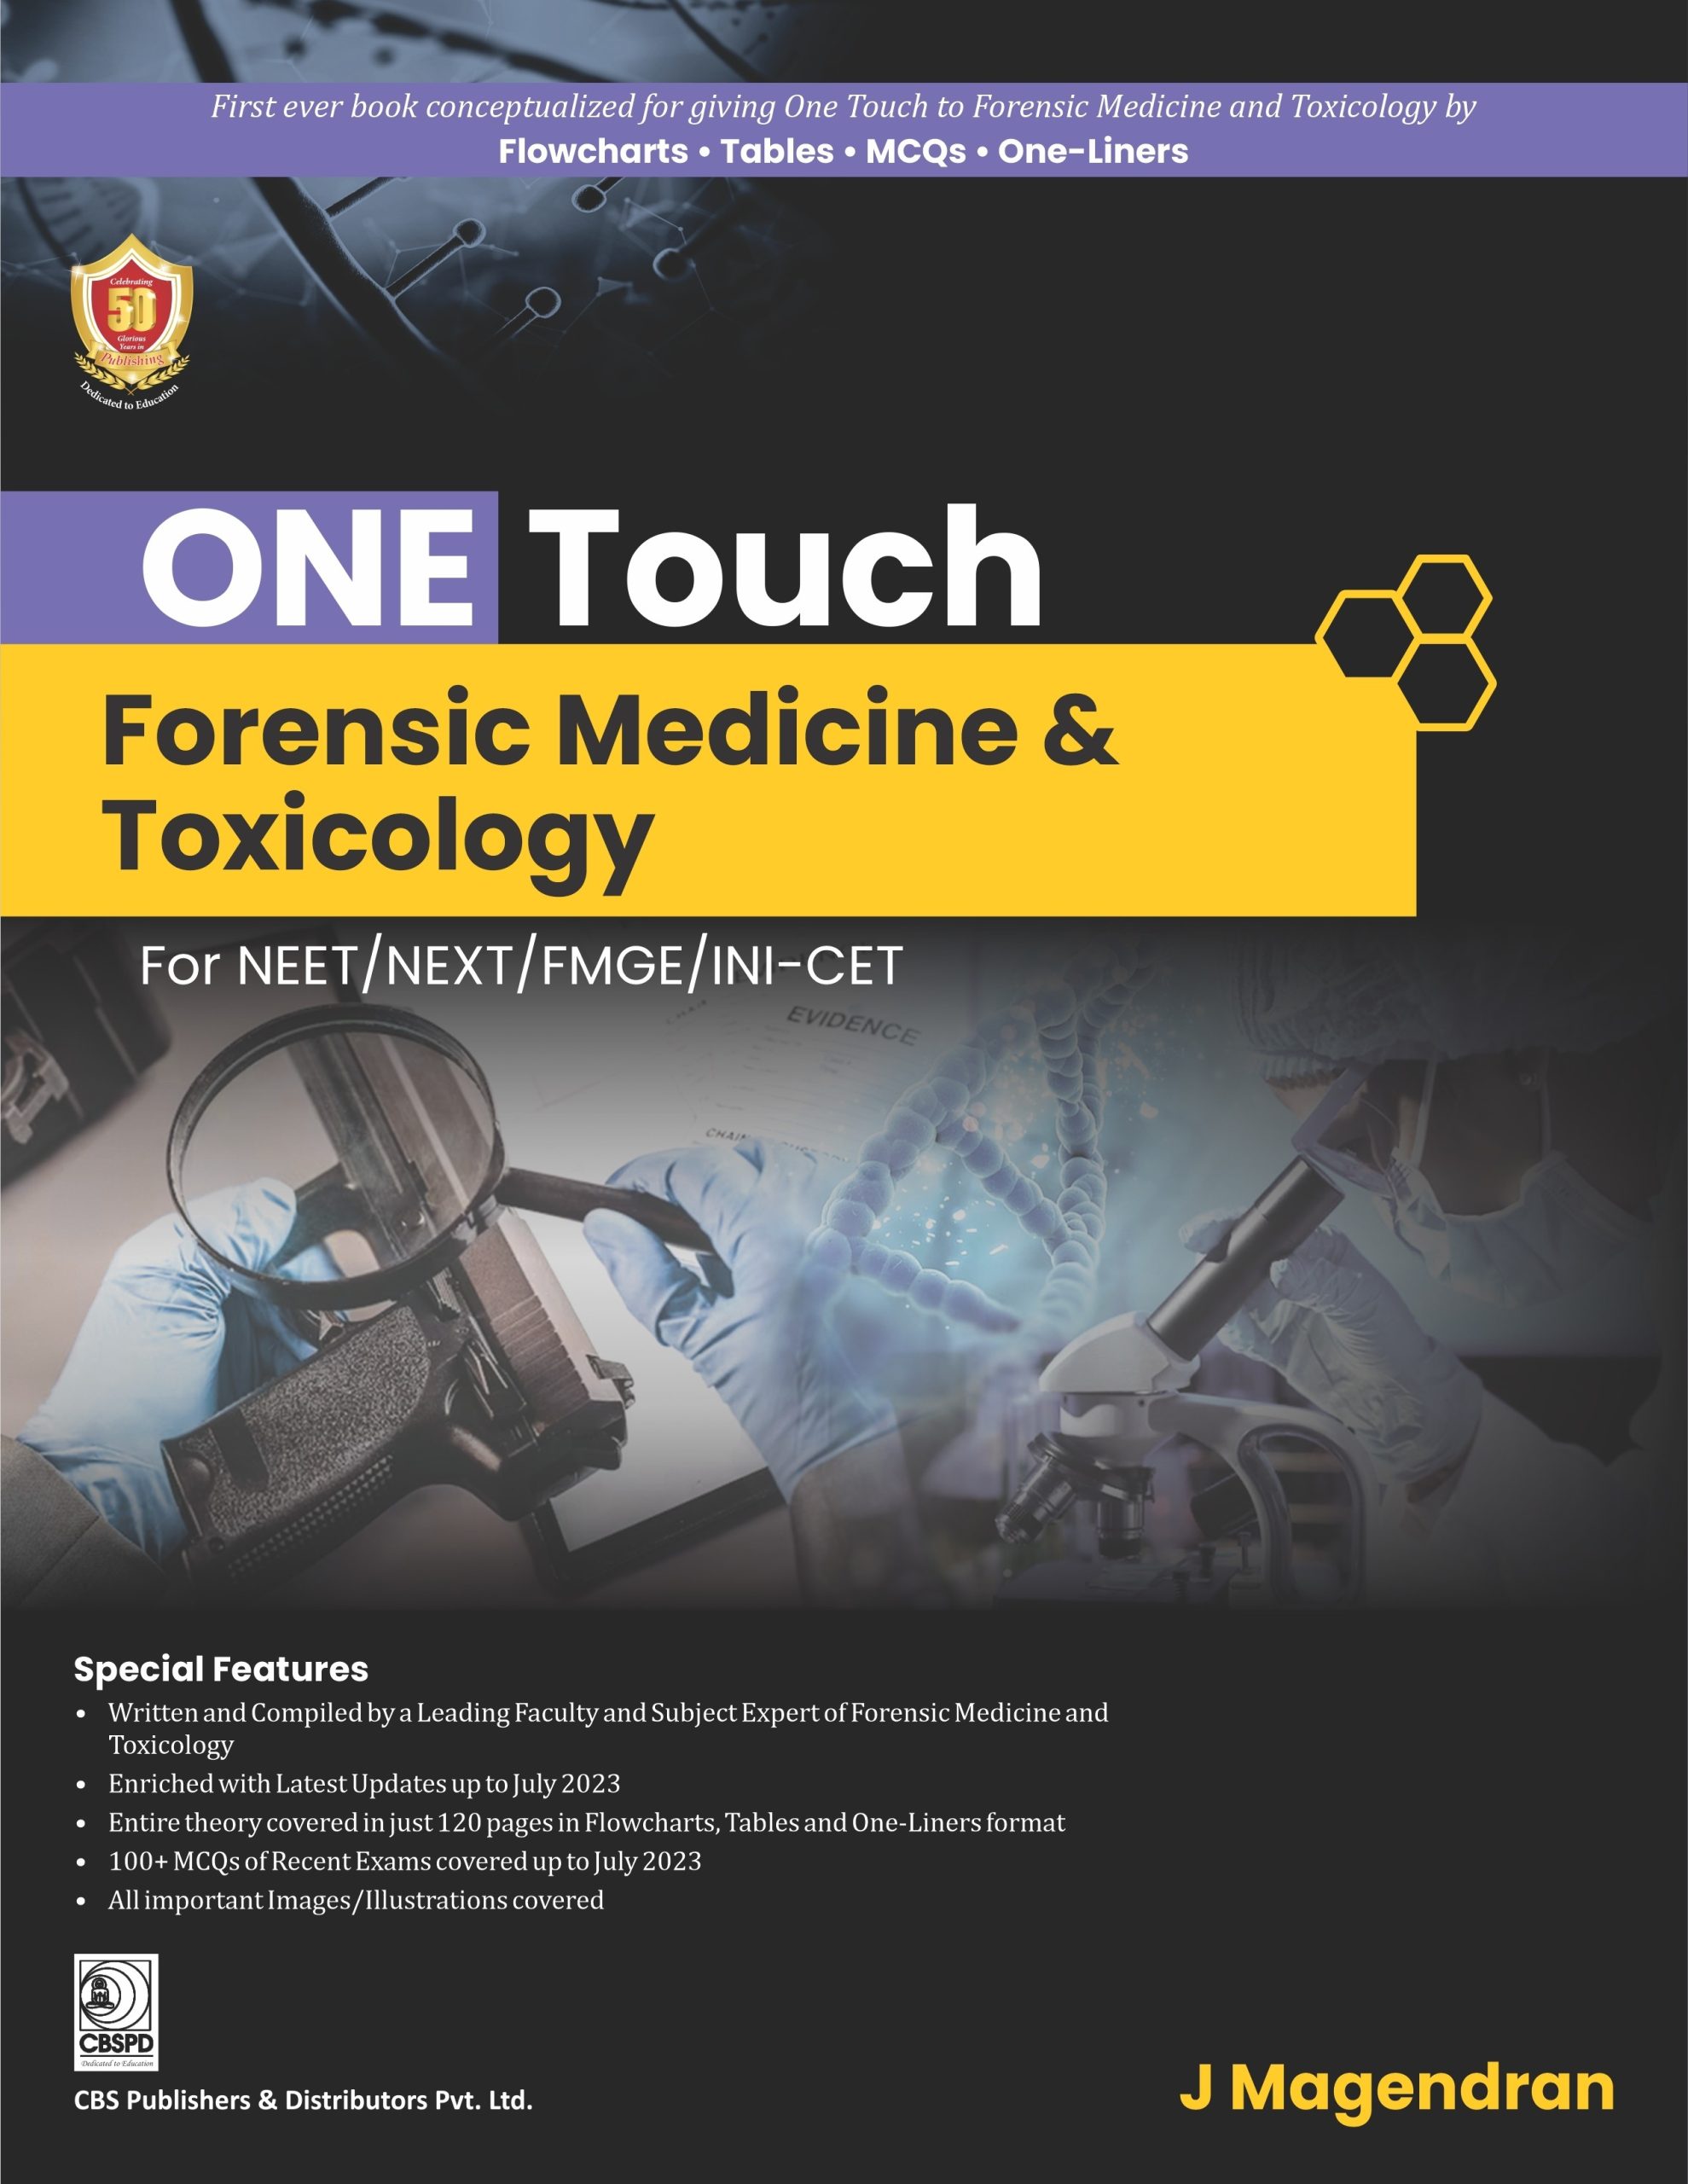 ONE TOUCH Forensic Medicine & Toxicology for NEET/NEXT/FMGE/INI-CET by Dr Magendran